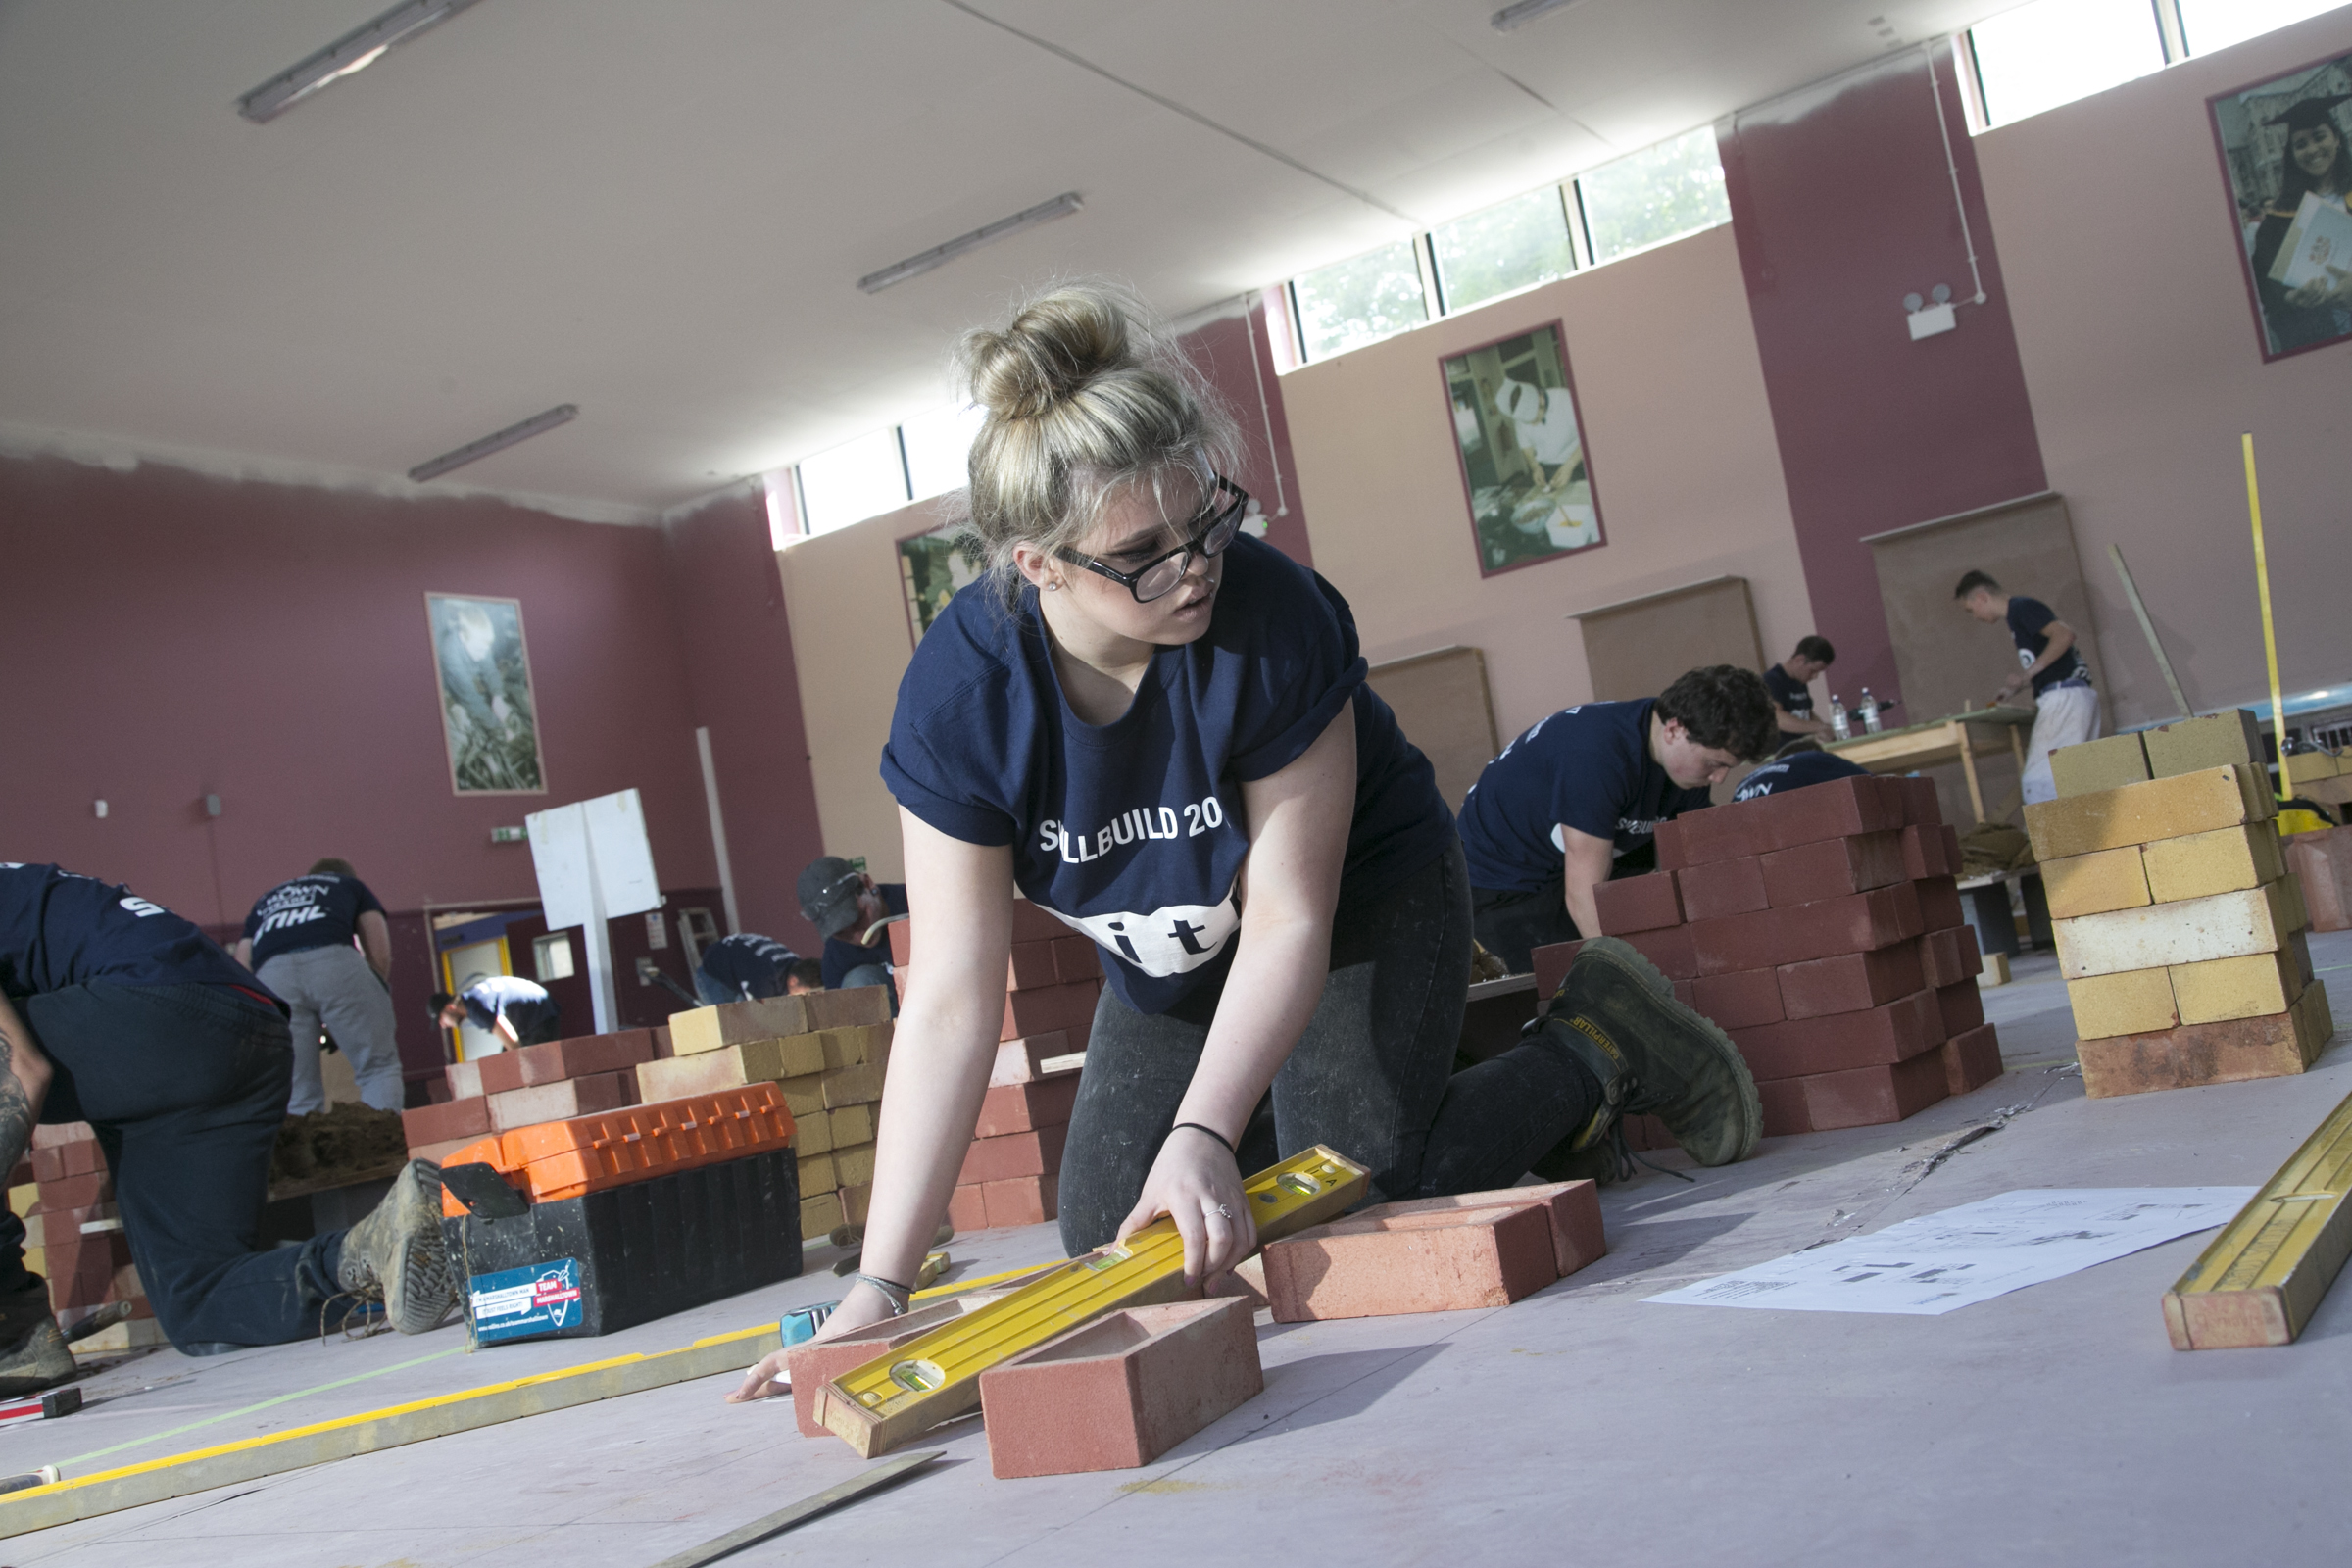 UK’s first all-female bricklaying competition launched